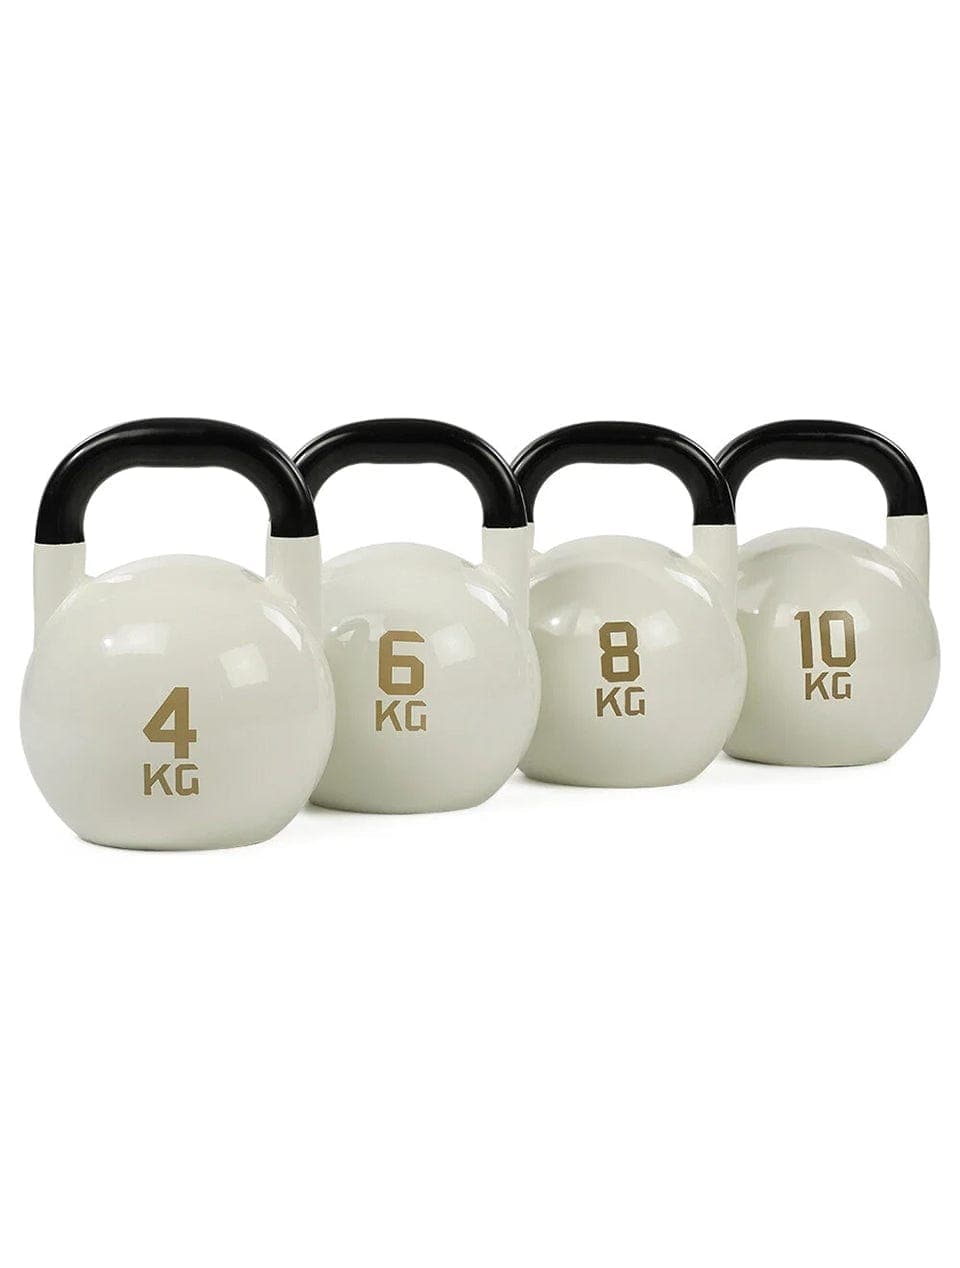 LivePro Steel Competition Kettlebell 4 Kg to 10 Kg - Athletix.ae